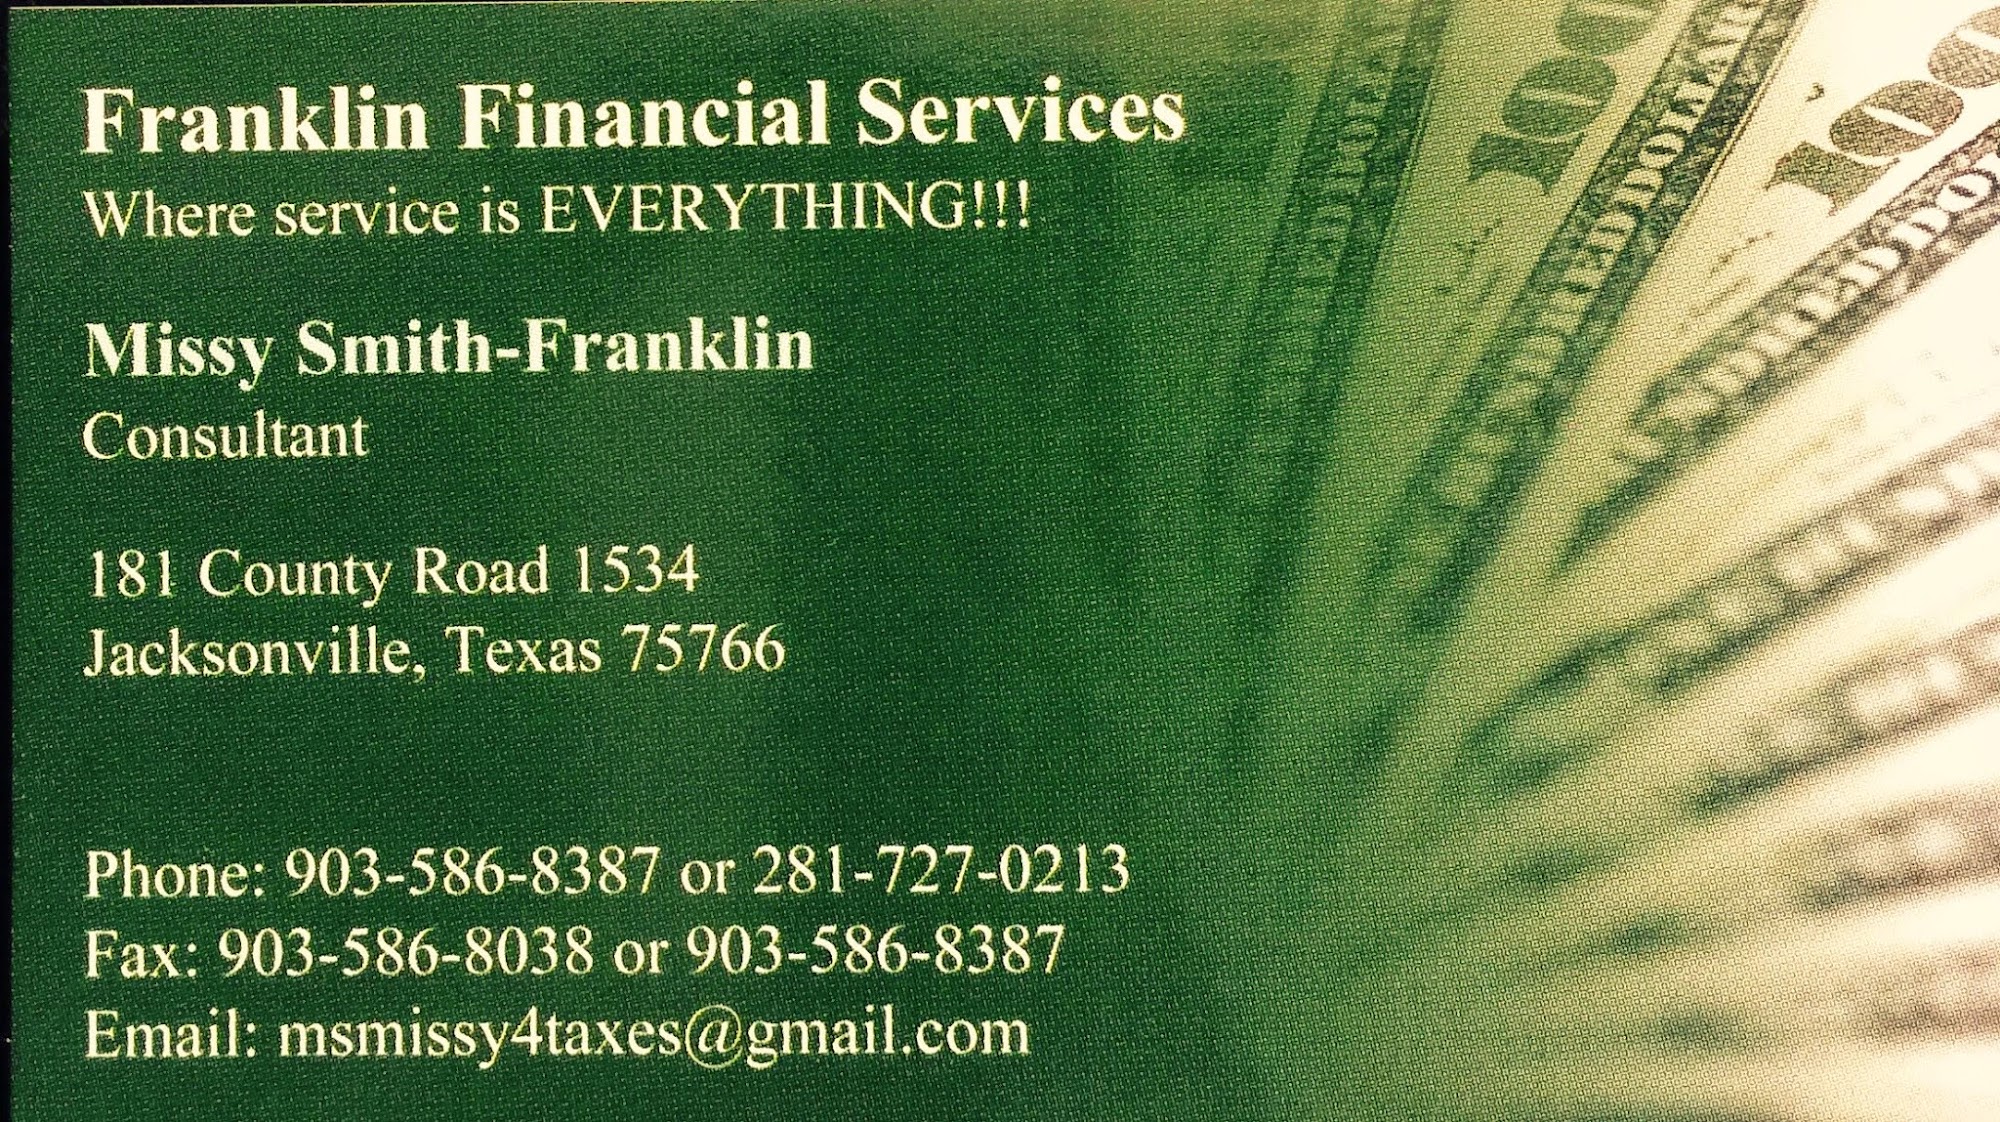 Missy's Tax Service And Franklin Financial Services